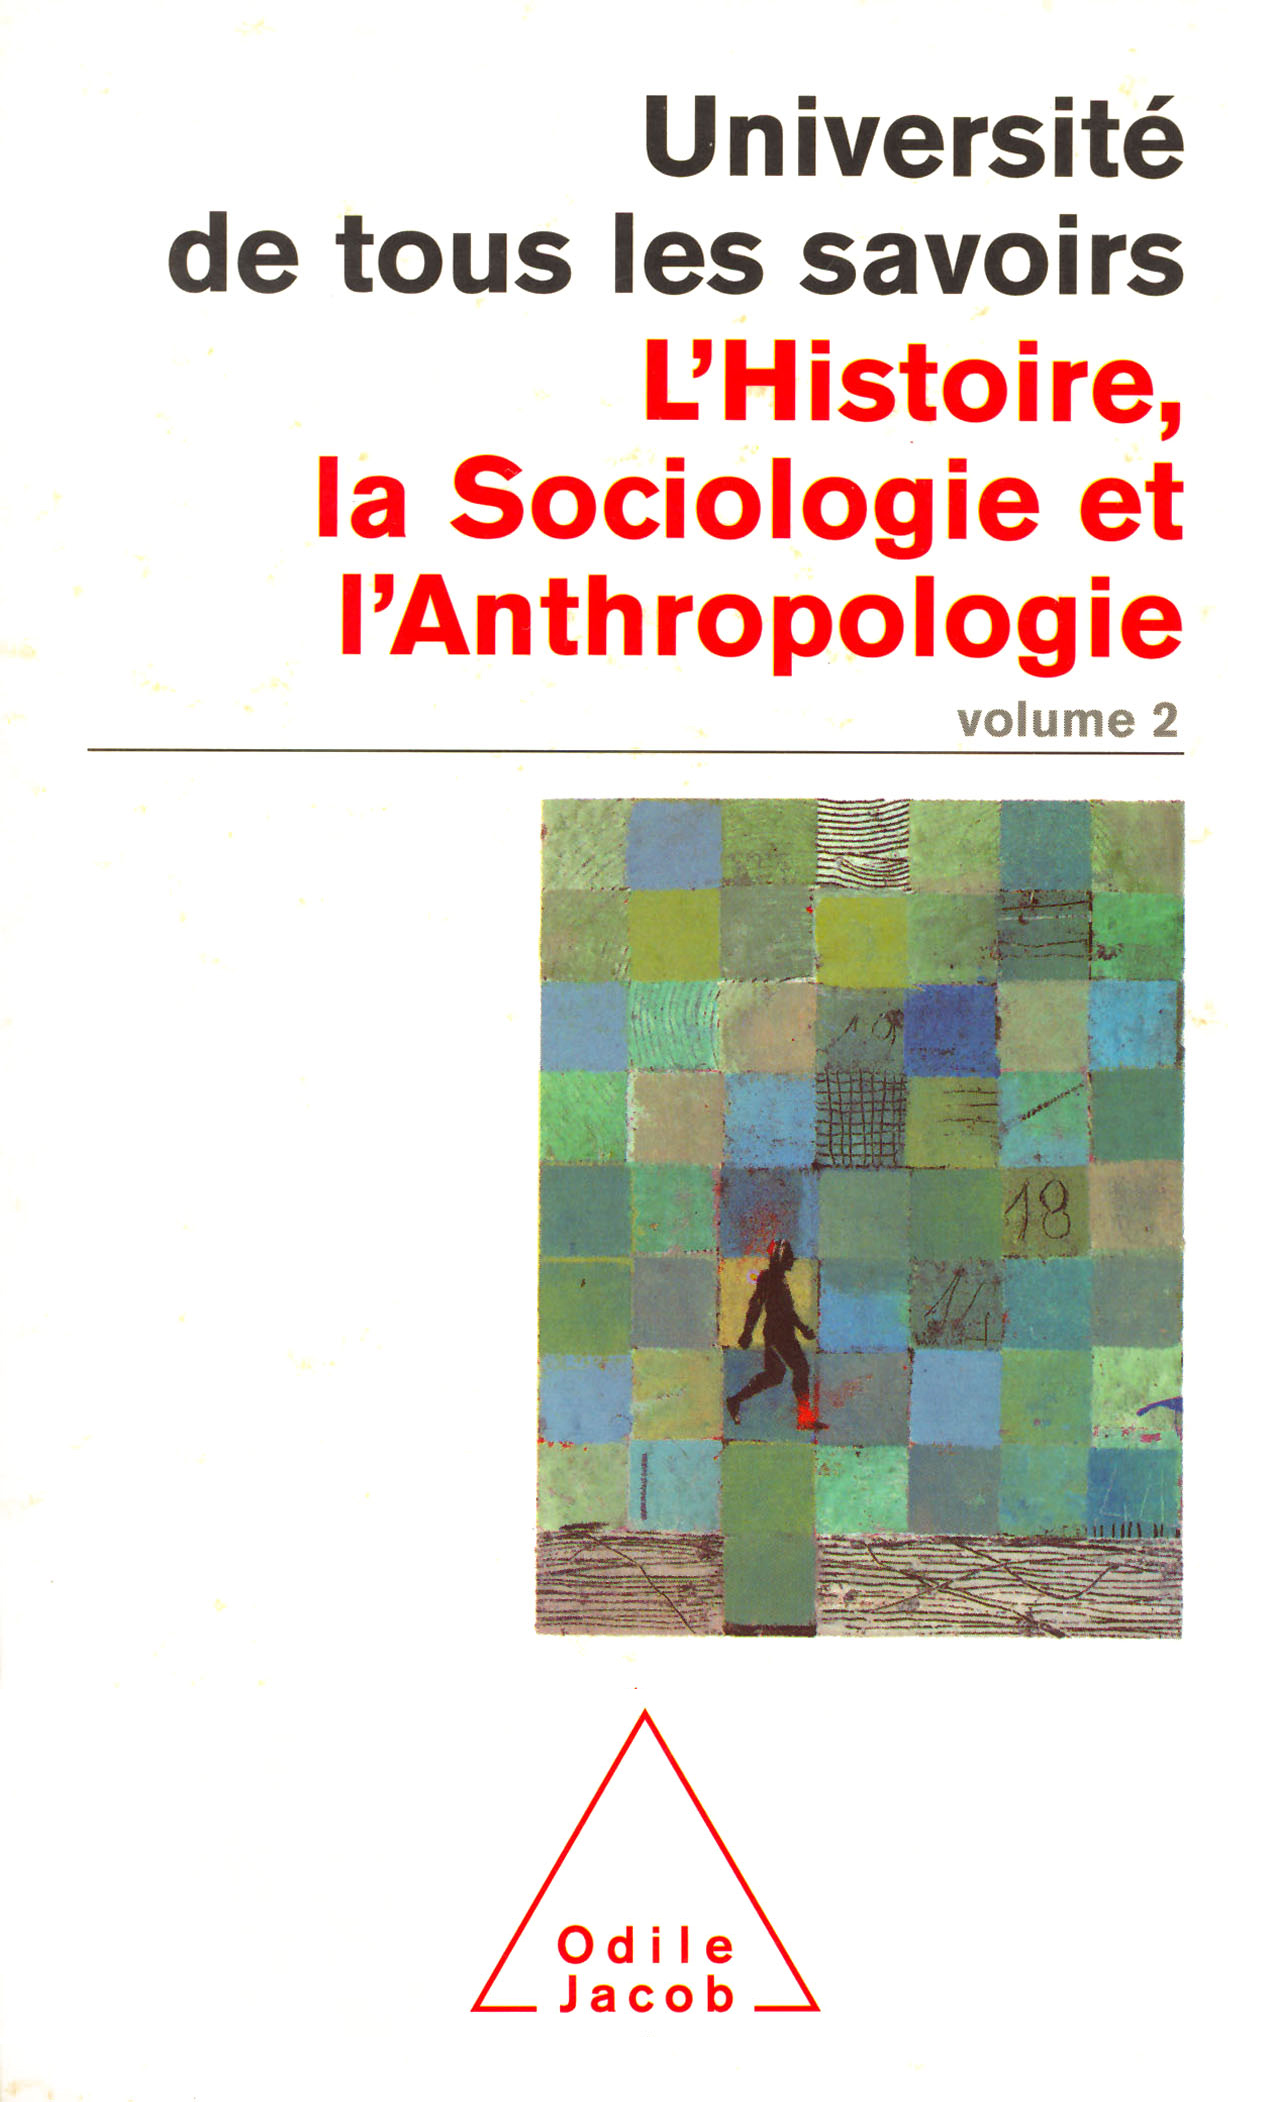 Volume 2: History, Sociology and Anthropology